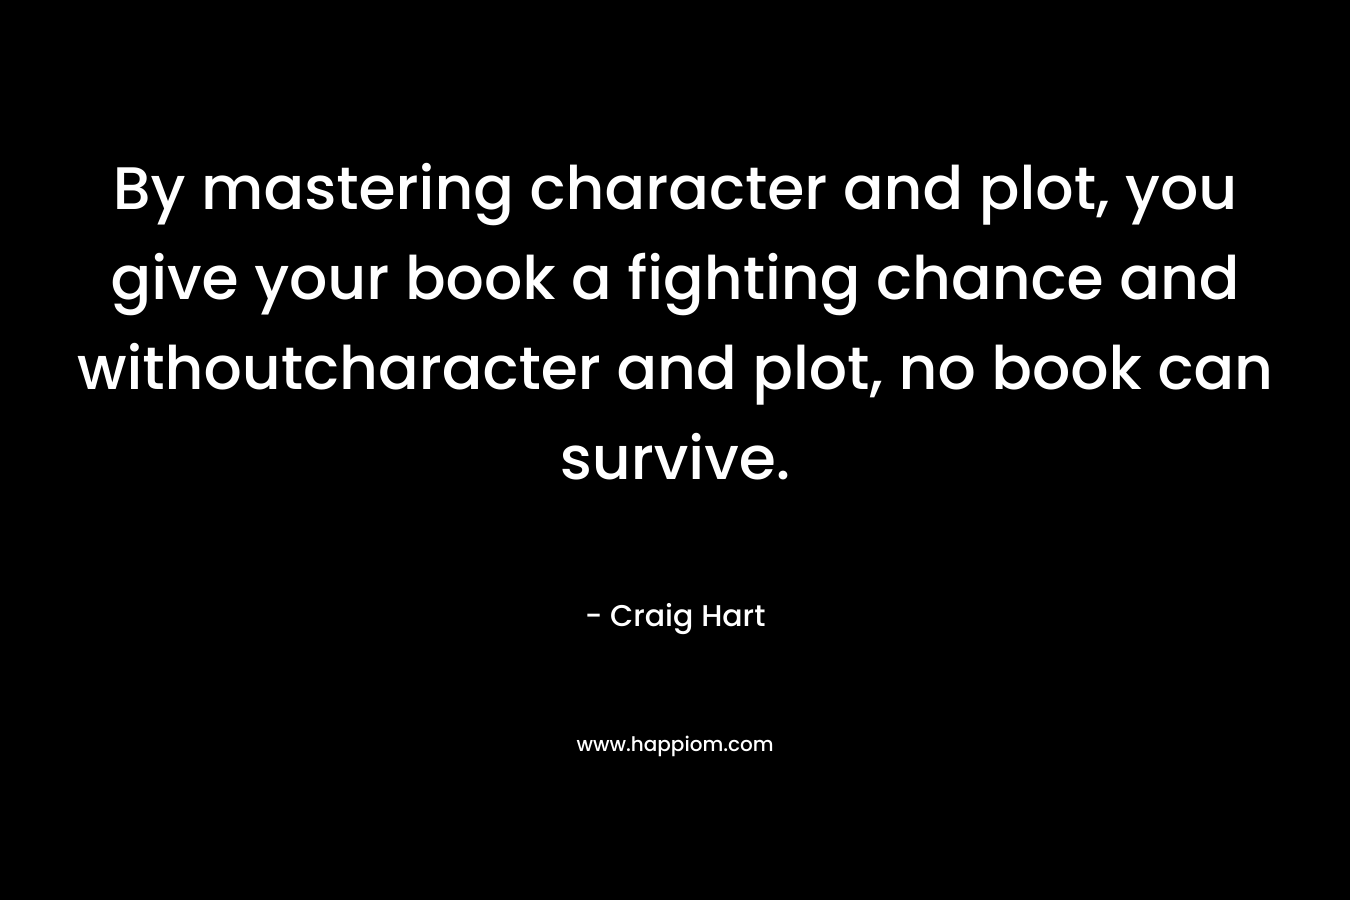 By mastering character and plot, you give your book a fighting chance and withoutcharacter and plot, no book can survive.